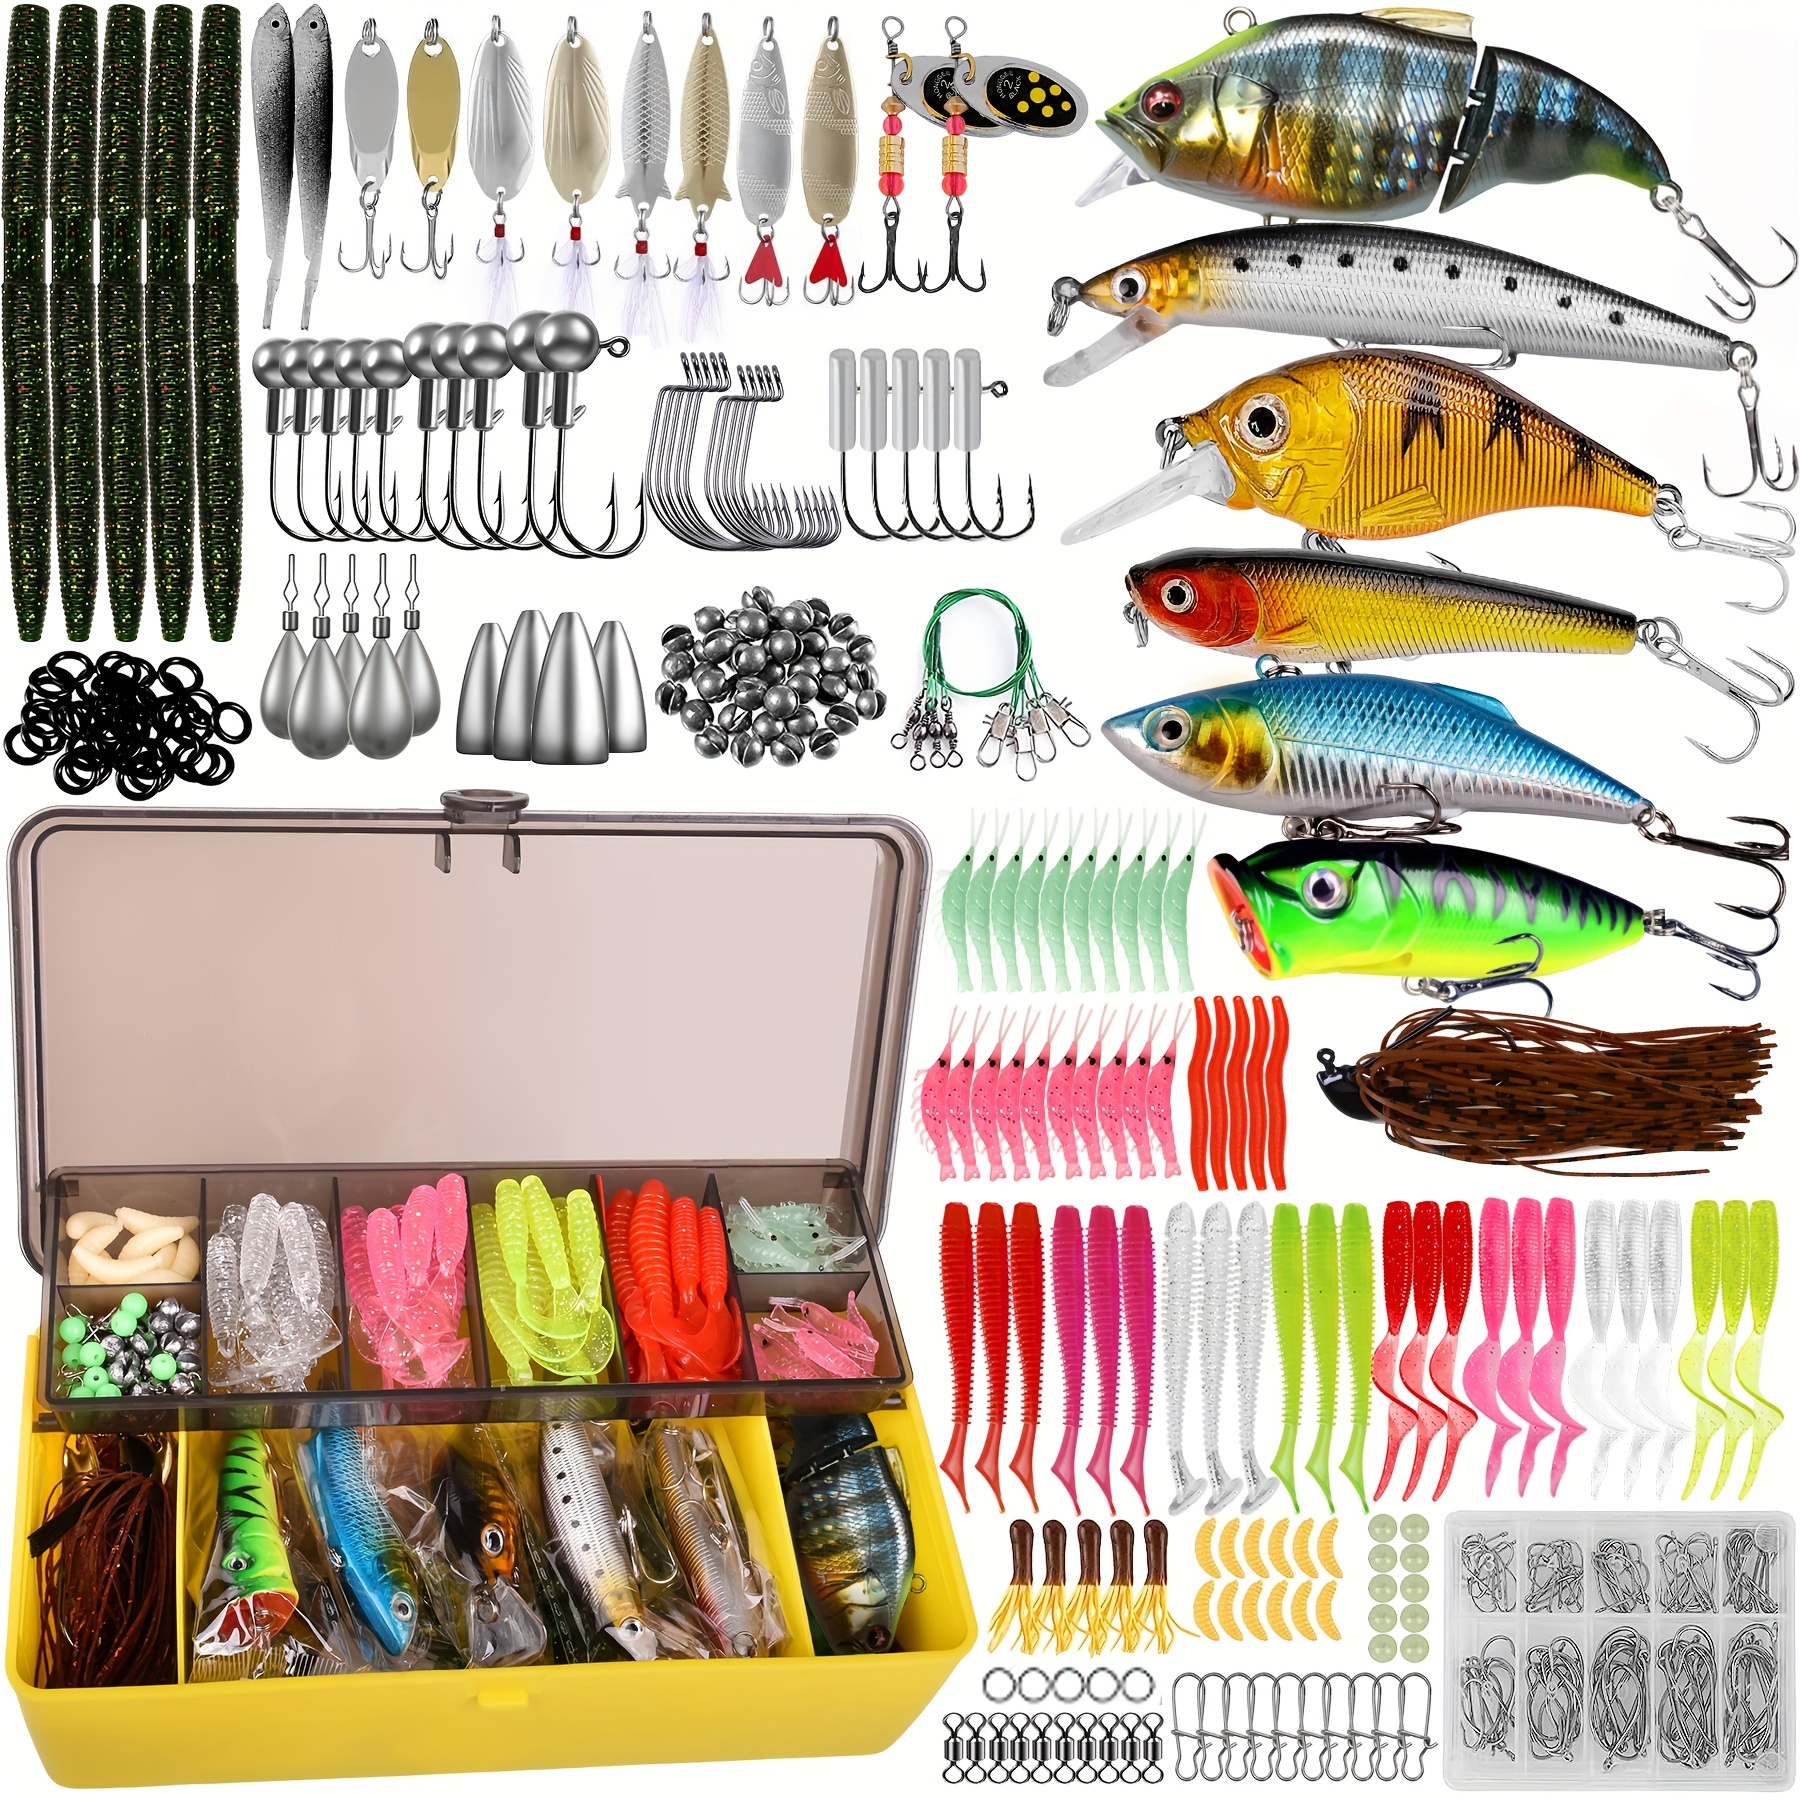  Fishing Lures for Freshwater - 20PCS Soft Plastic T-Tail Grub  Worm Baits - Complete Fishing Bait Kit with Tackle Box Included - Great Fishing  Deals of The Day Clearance 